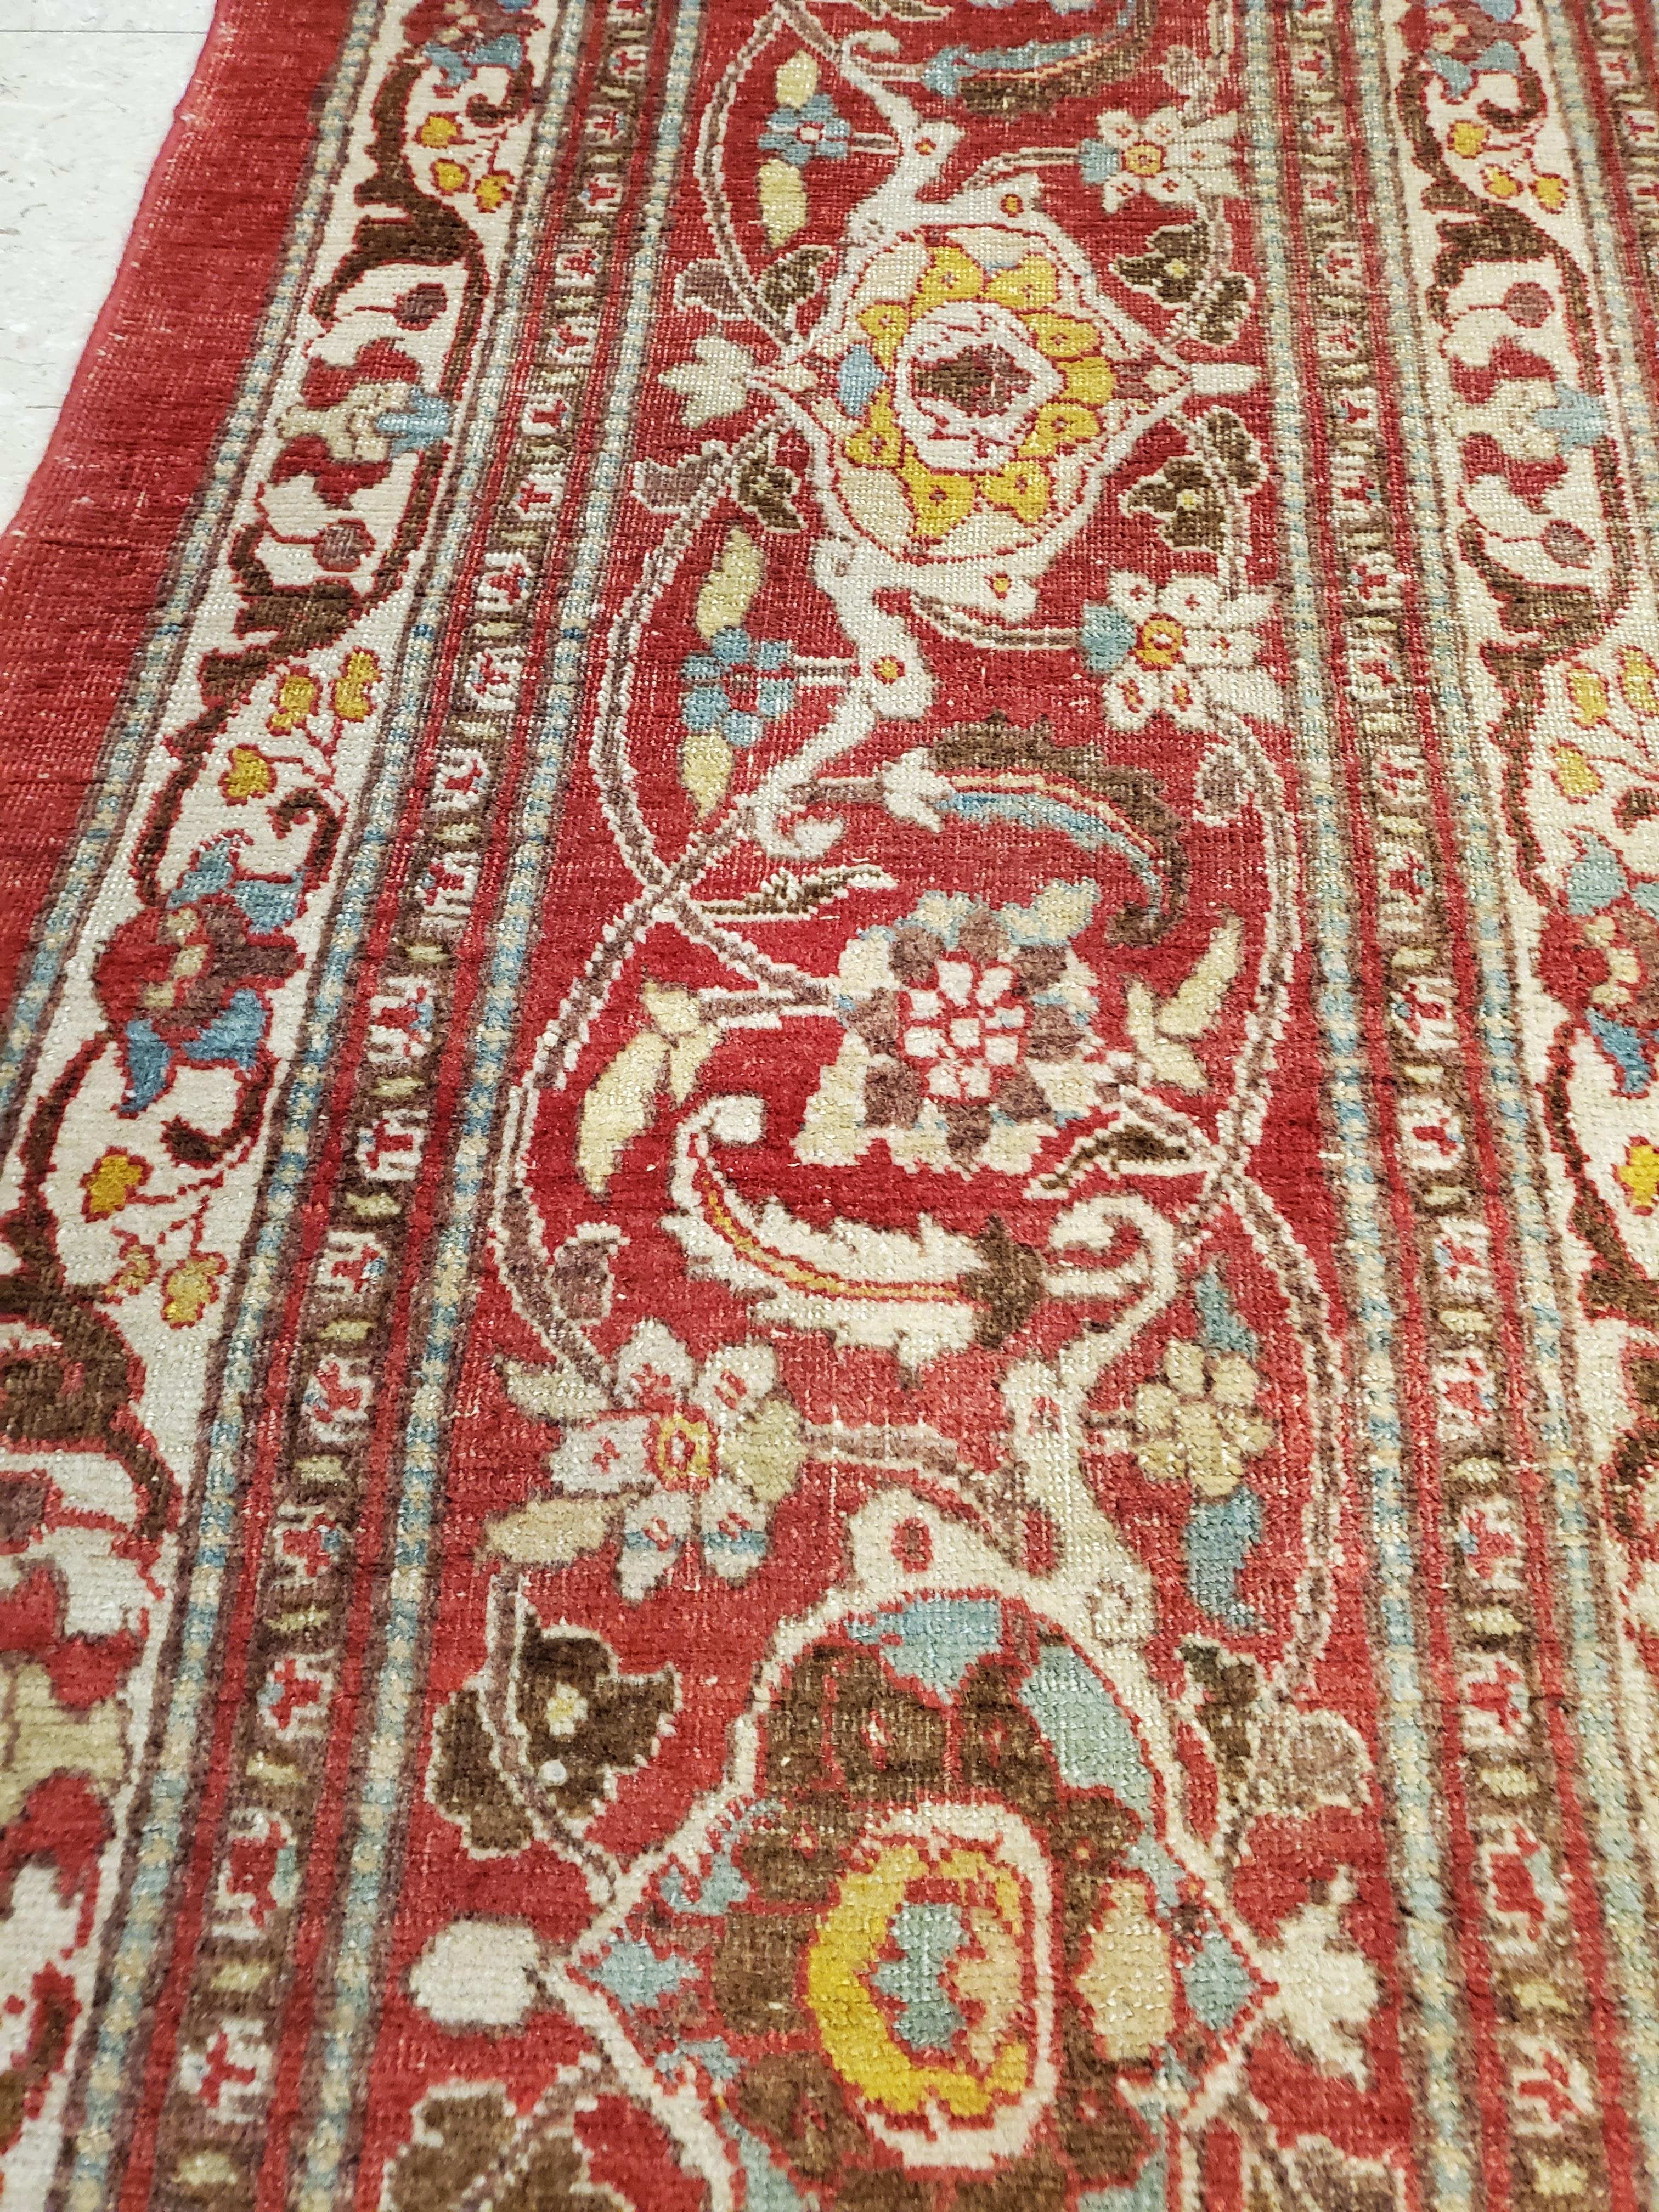 Antique Tabriz Carpet, Handmade Persian Rug in Floral Gold, Red and Beige For Sale 1